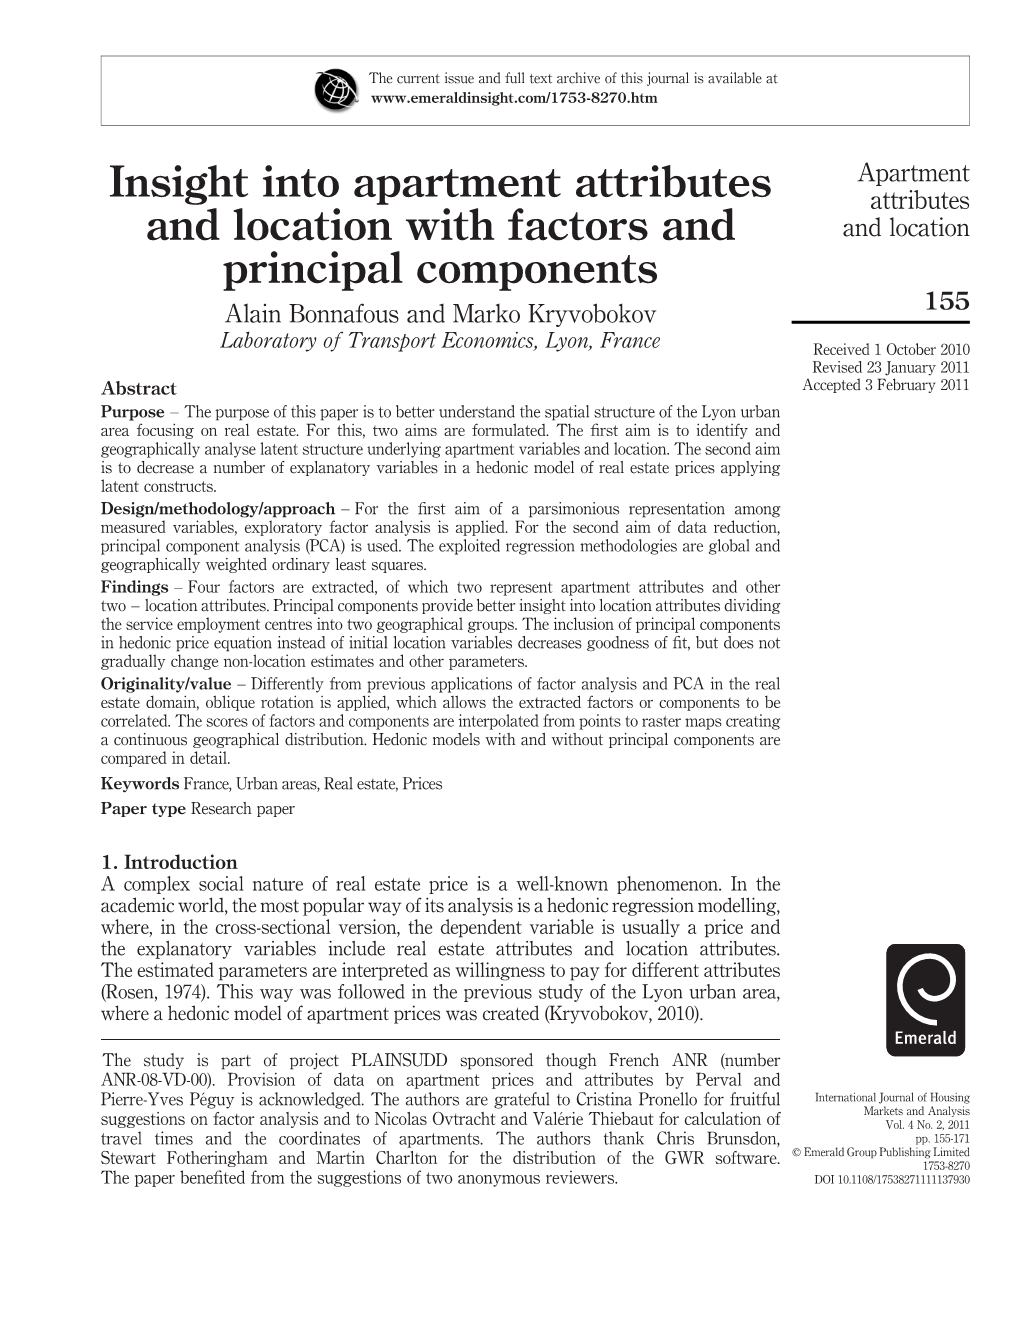 Insight Into Apartment Attributes and Location with Factors and Principal